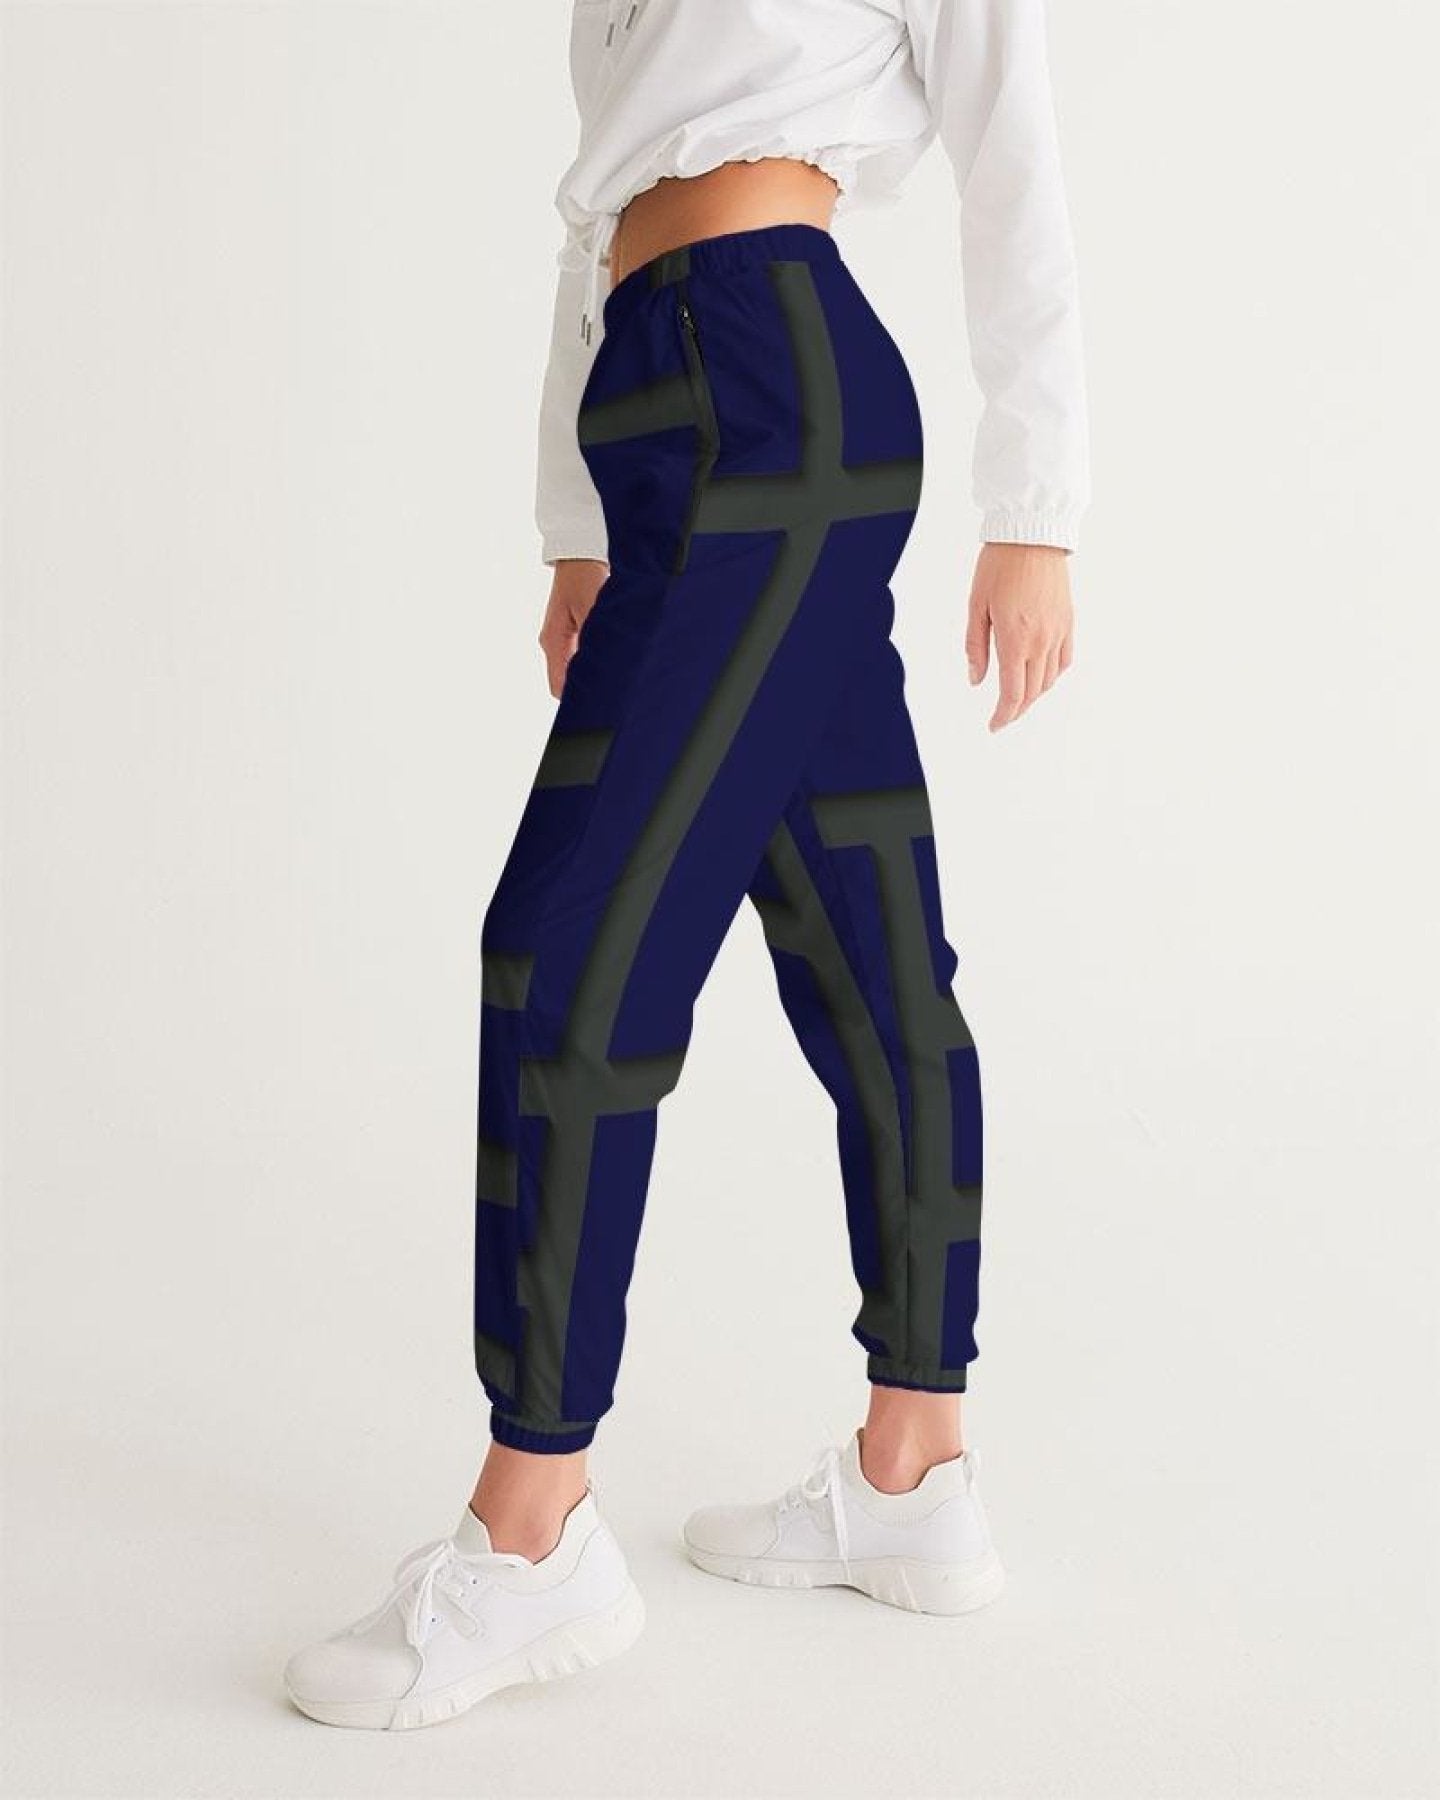 Womens Track Pants - Blue & Green Geometric Graphic Sports Pants - Scarvesnthangs